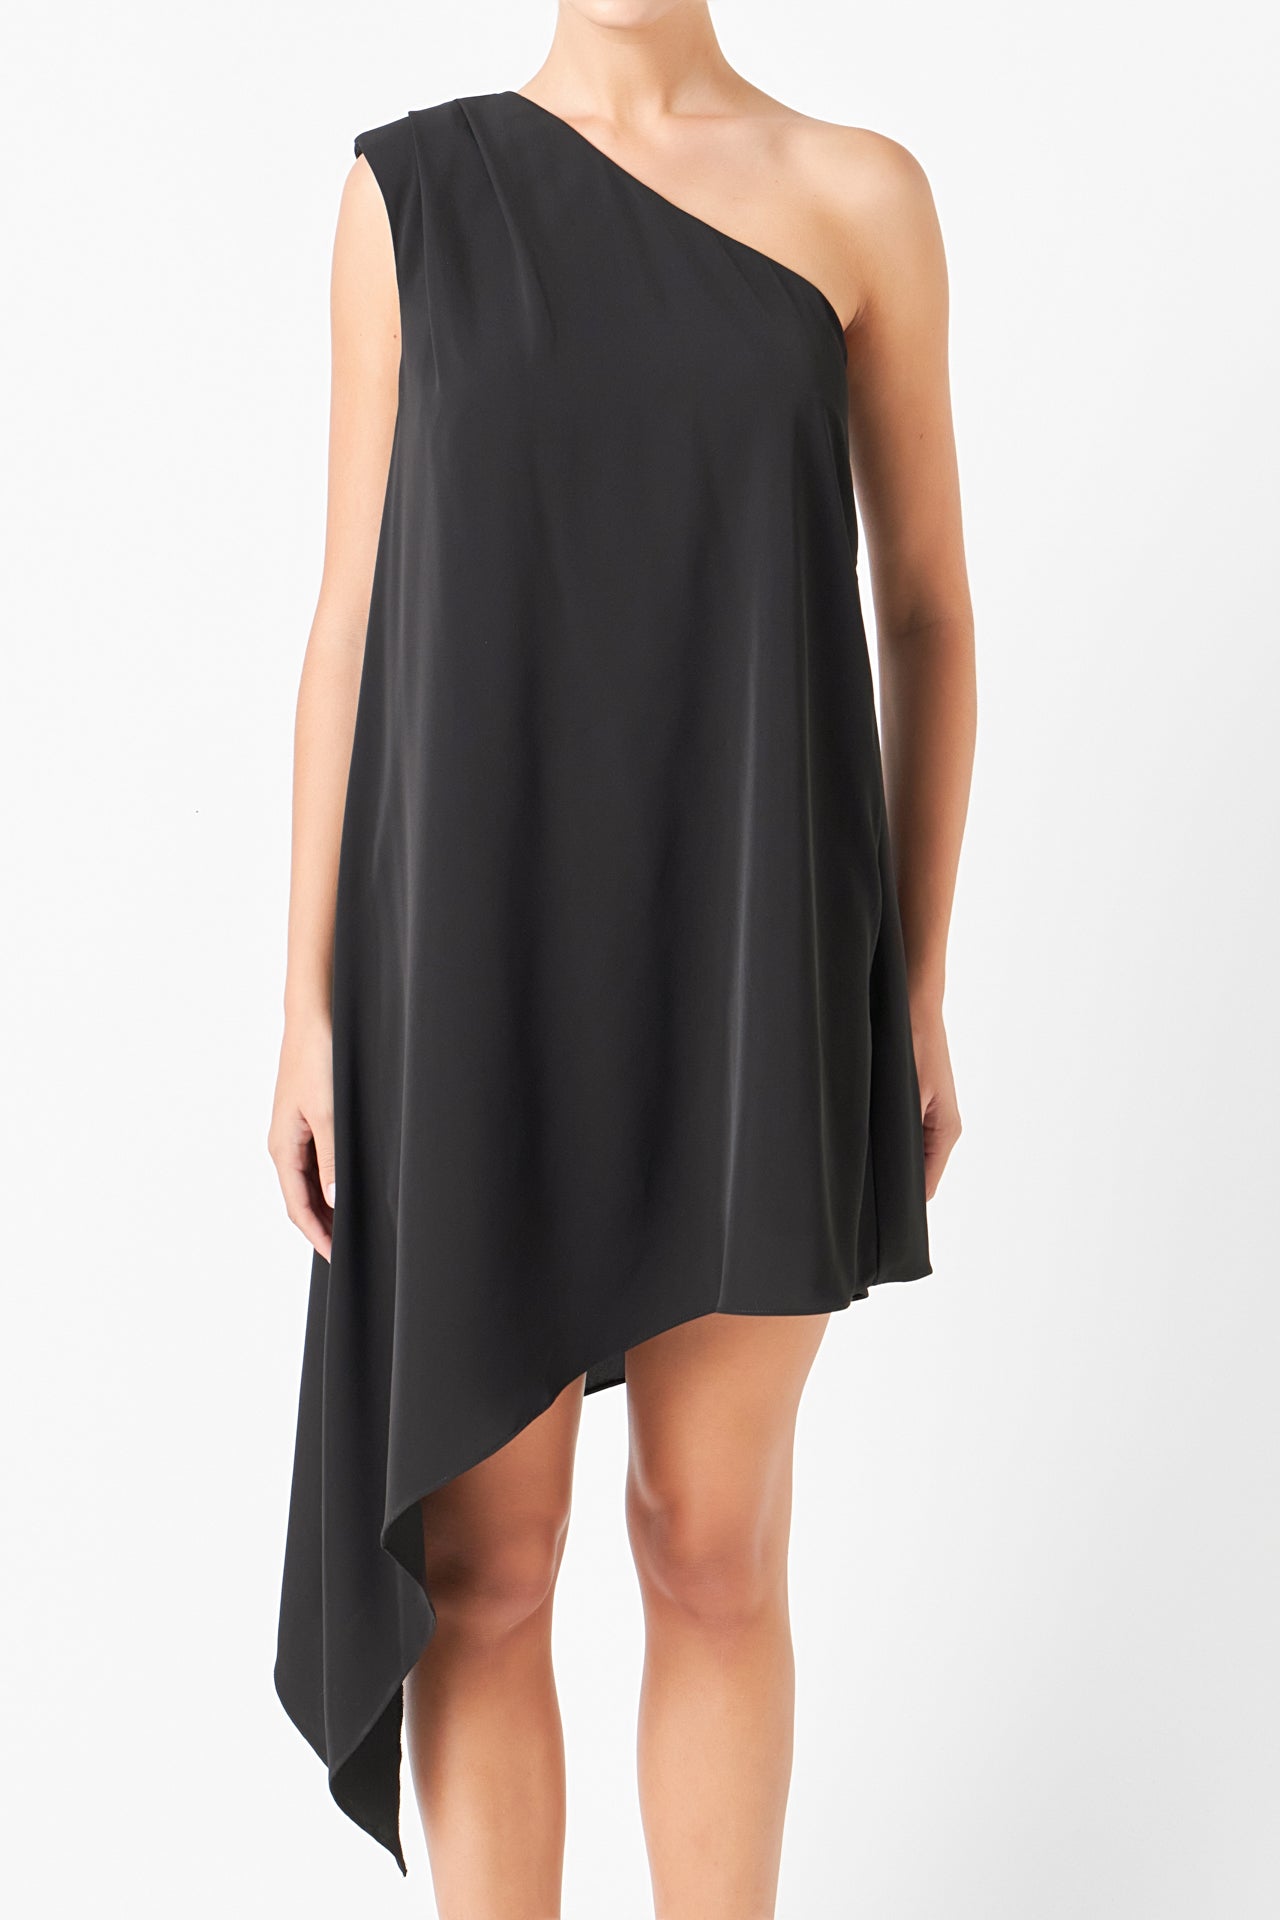 ENDLESS ROSE - Shoulder Pintucked Asymmetrical Mini Dress - DRESSES available at Objectrare